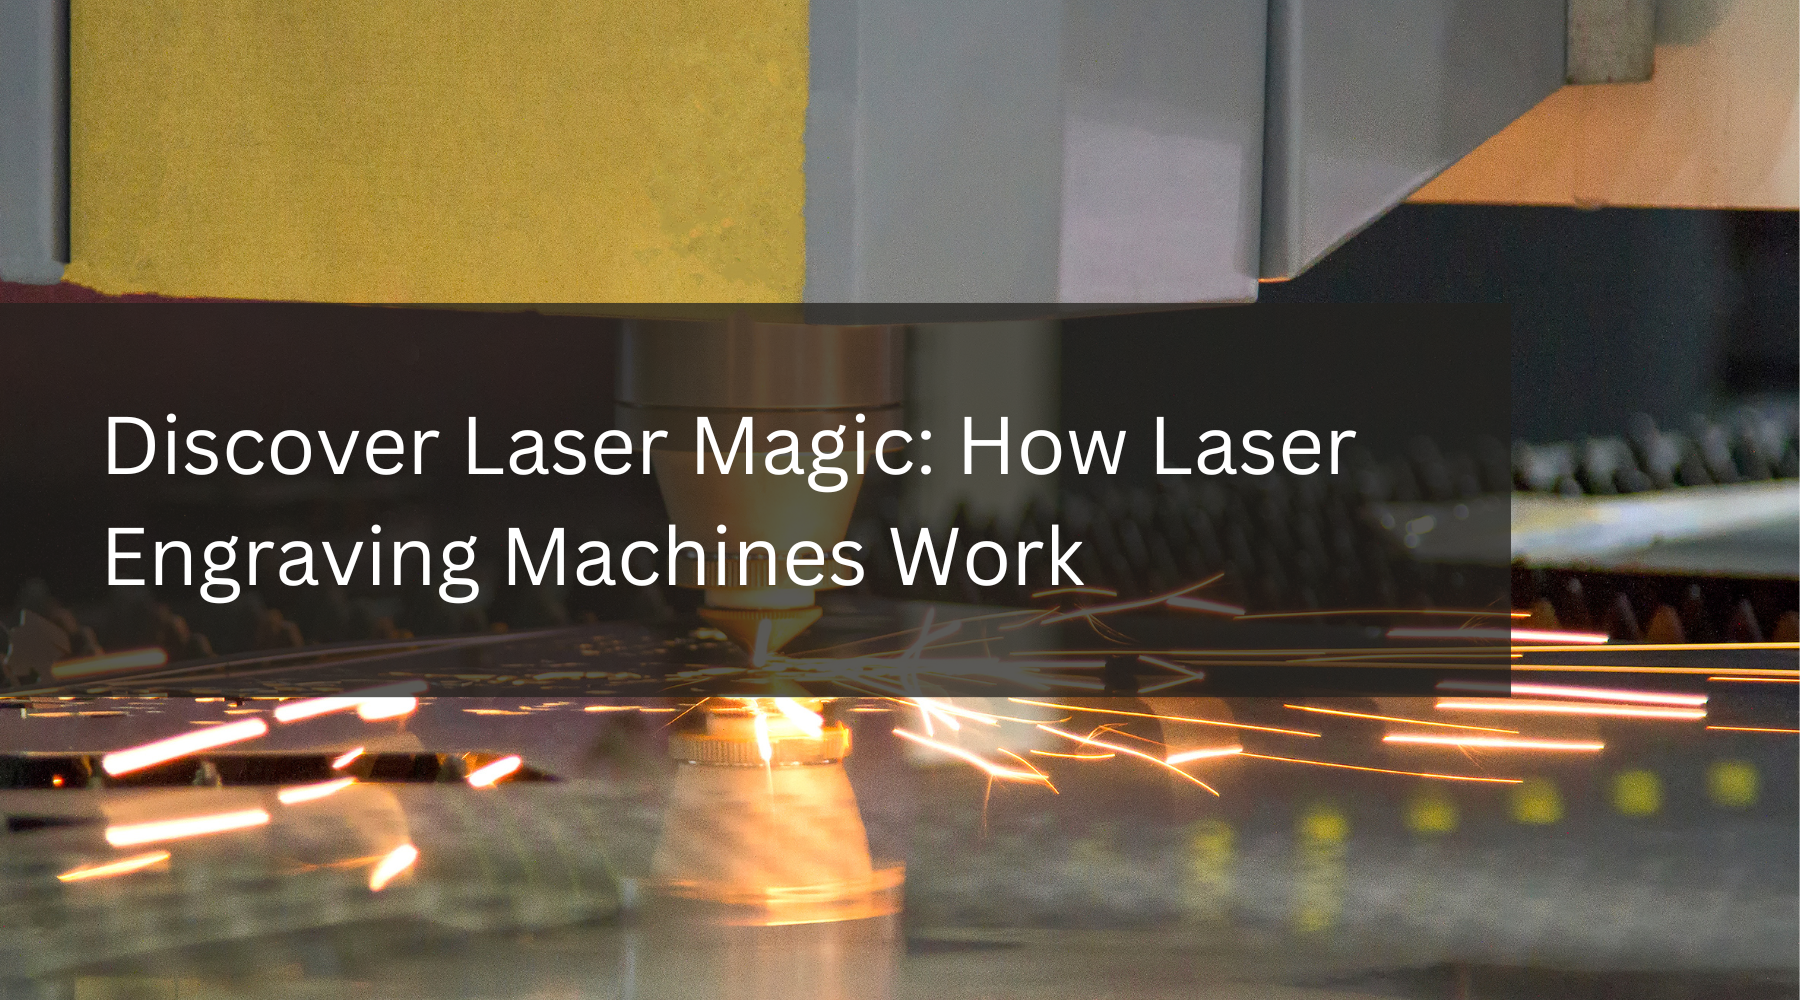 Discover Laser Magic: How Laser Engraving Machines Work